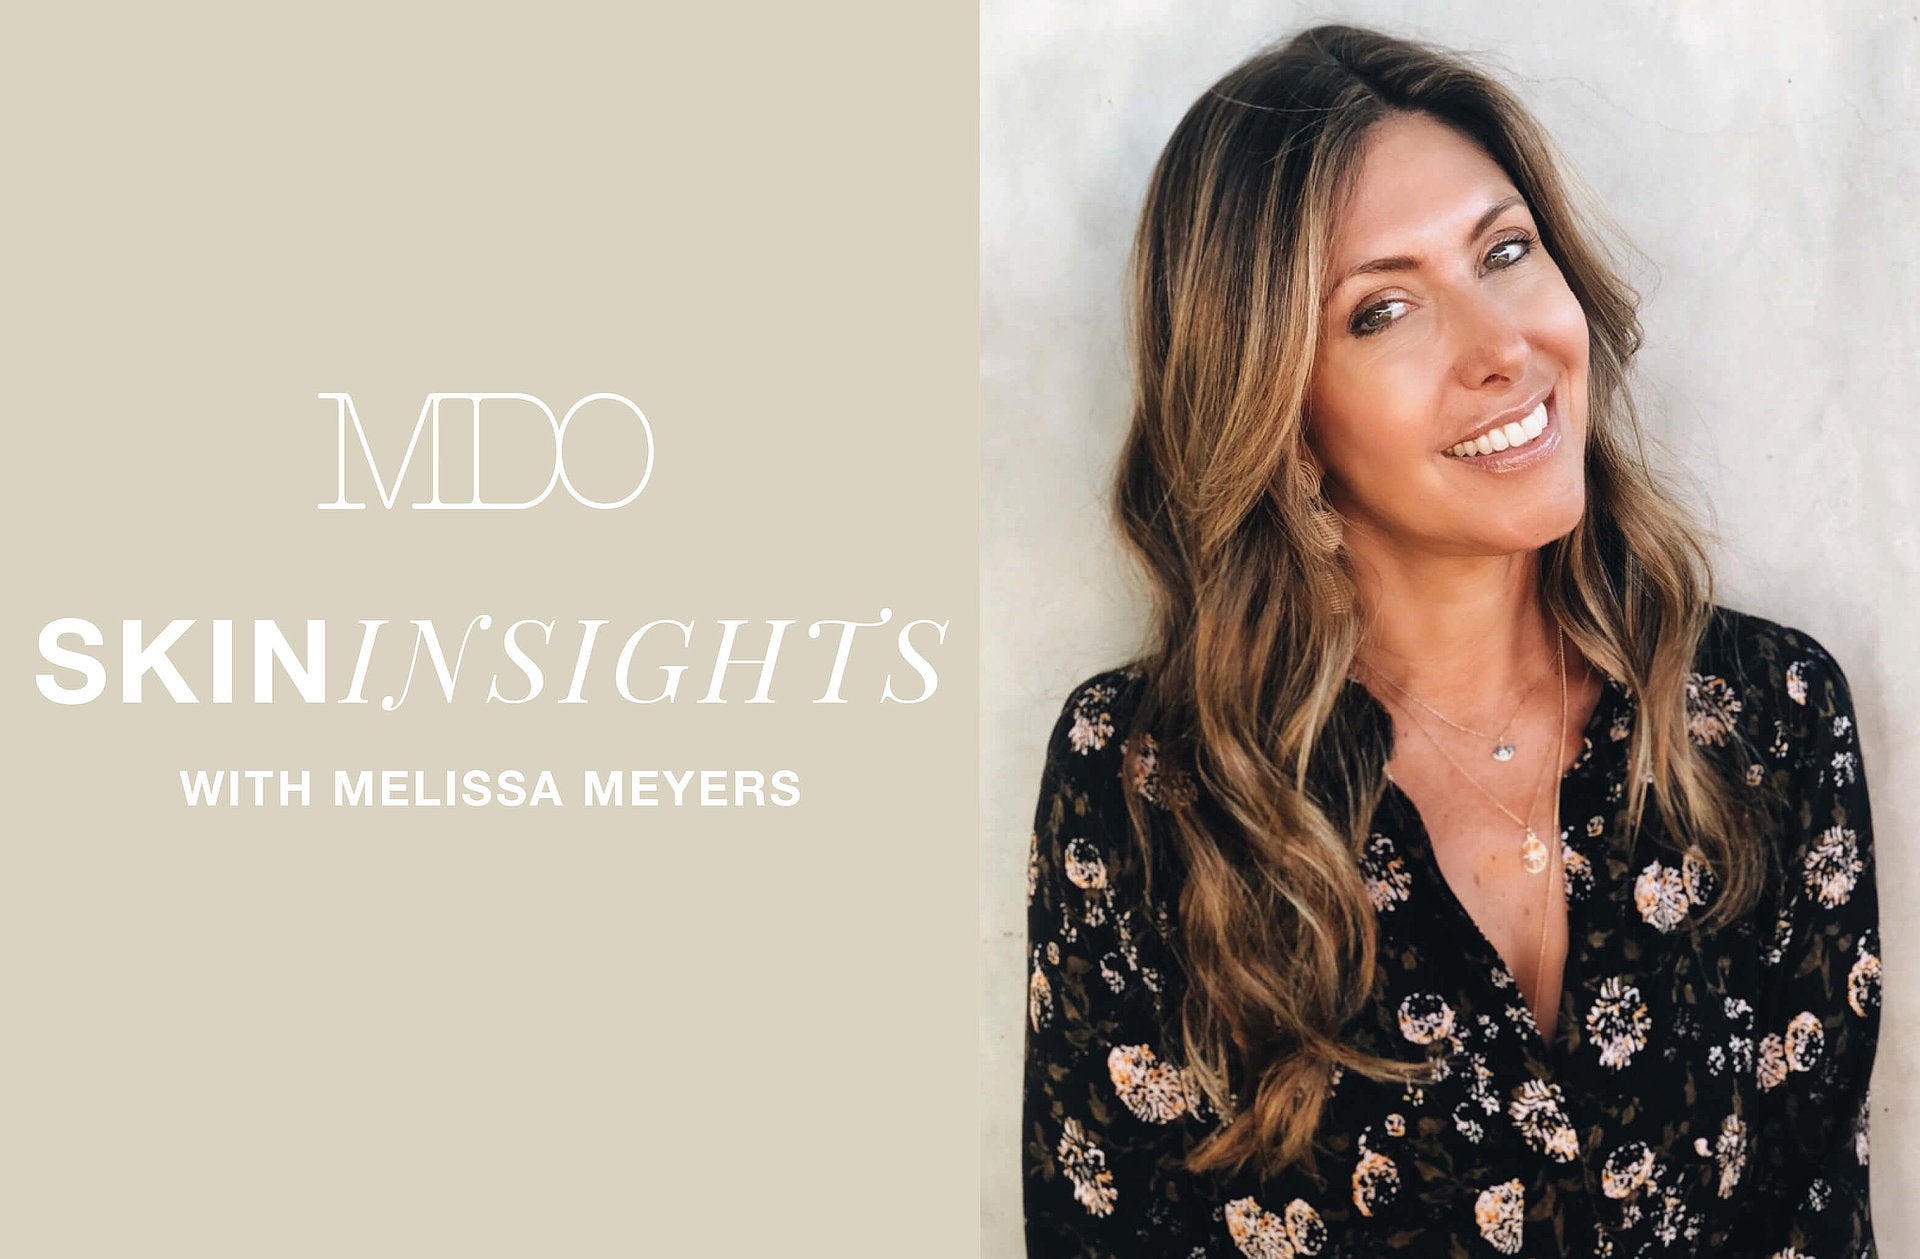 #MDOSKINCLUB Skincare Routine by Beauty Expert Melissa Meyers